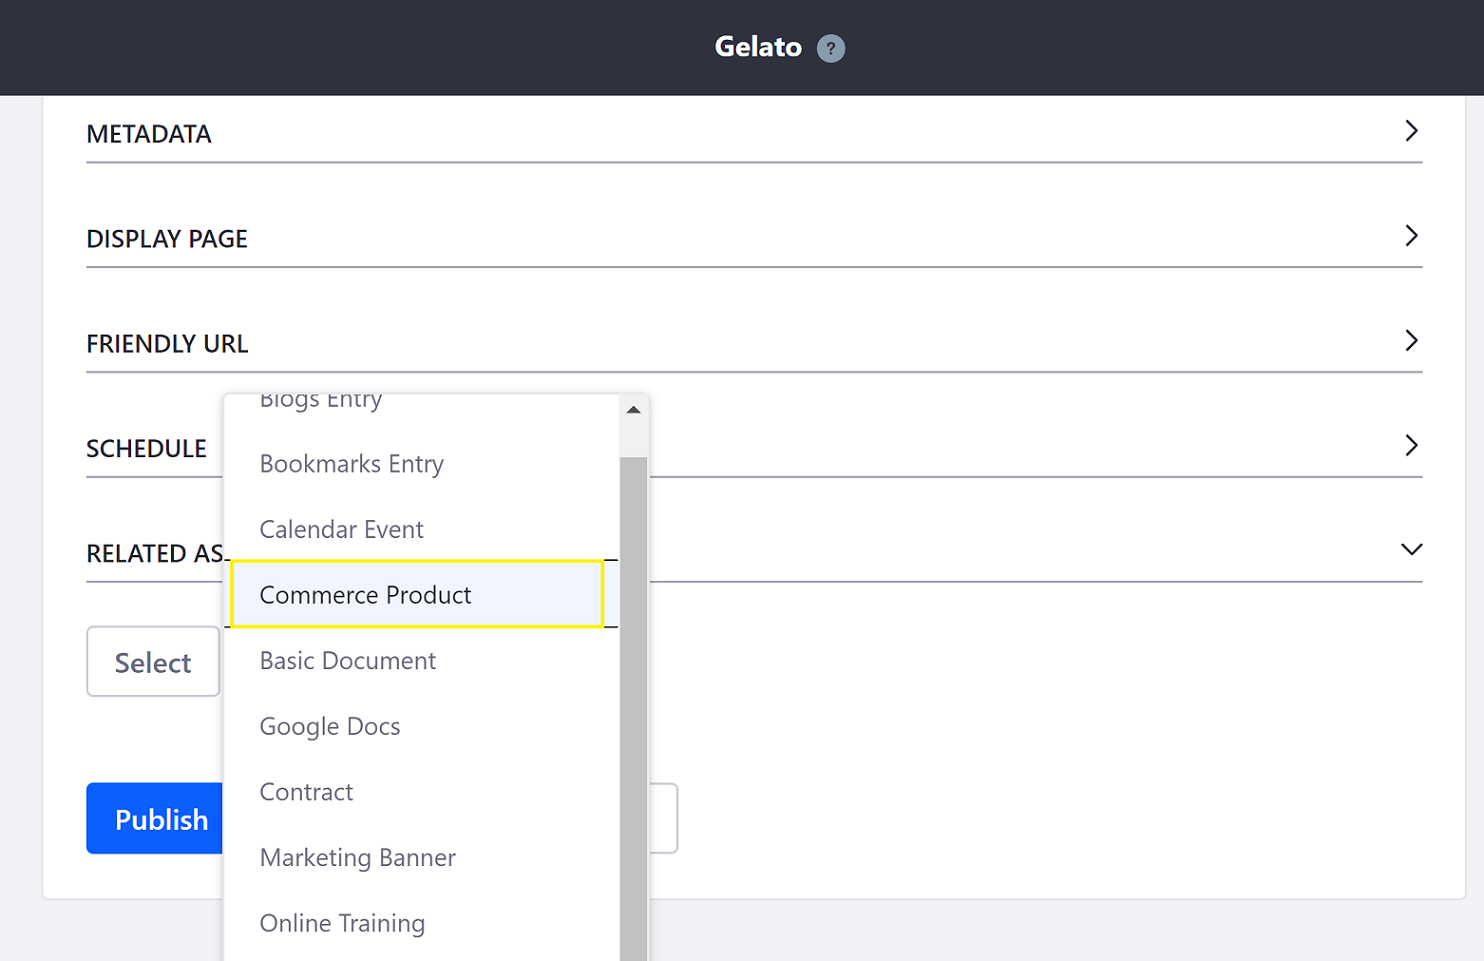 Select Commerce Product in the Related Assets section.